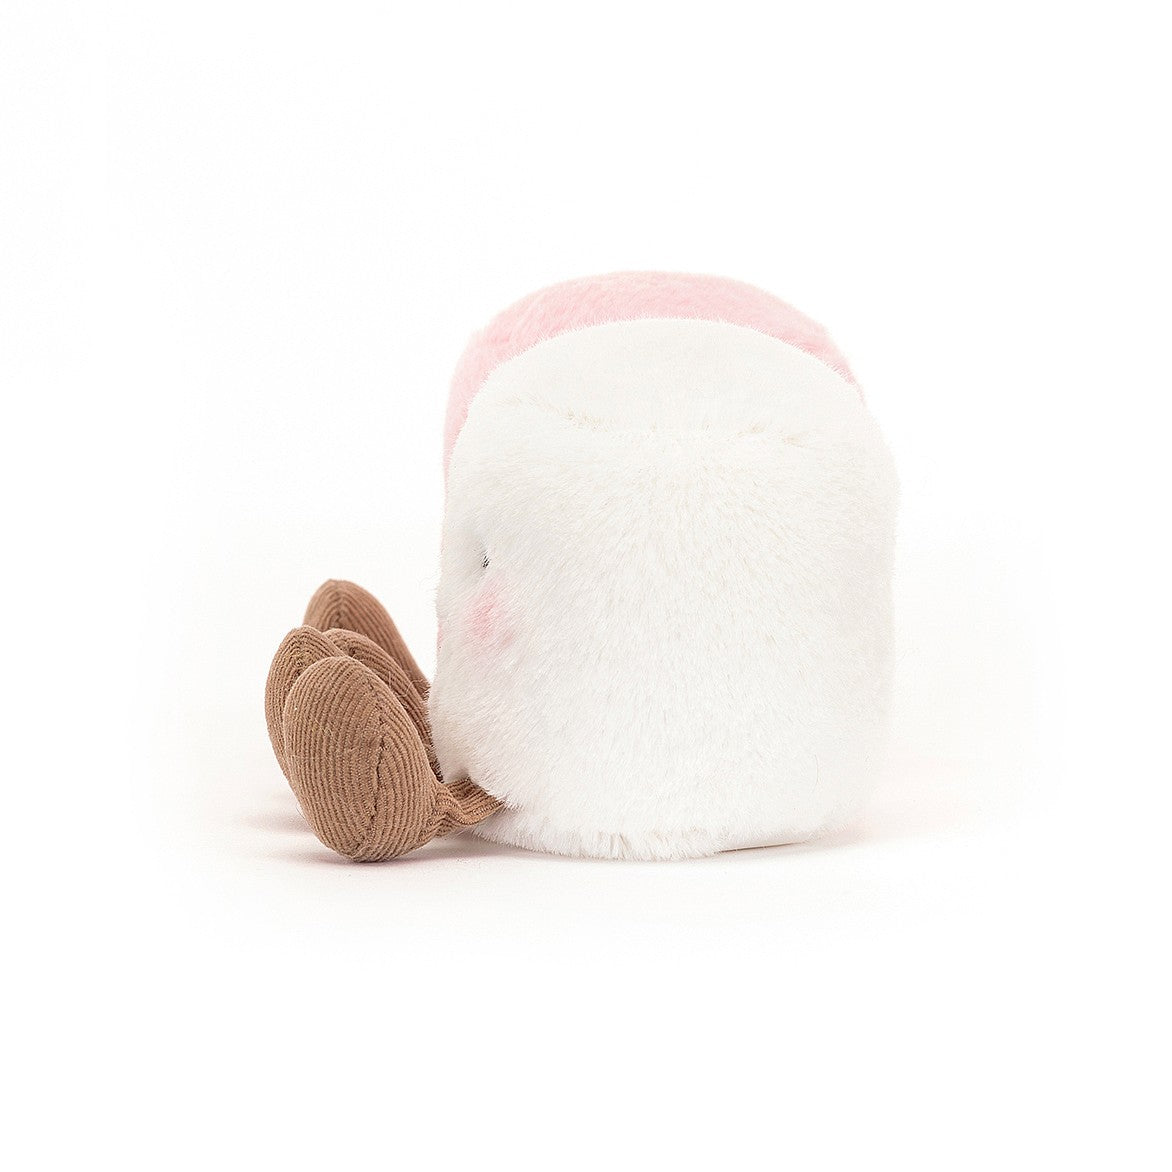 Jellycat Amuseable Pink and White Marshmallows